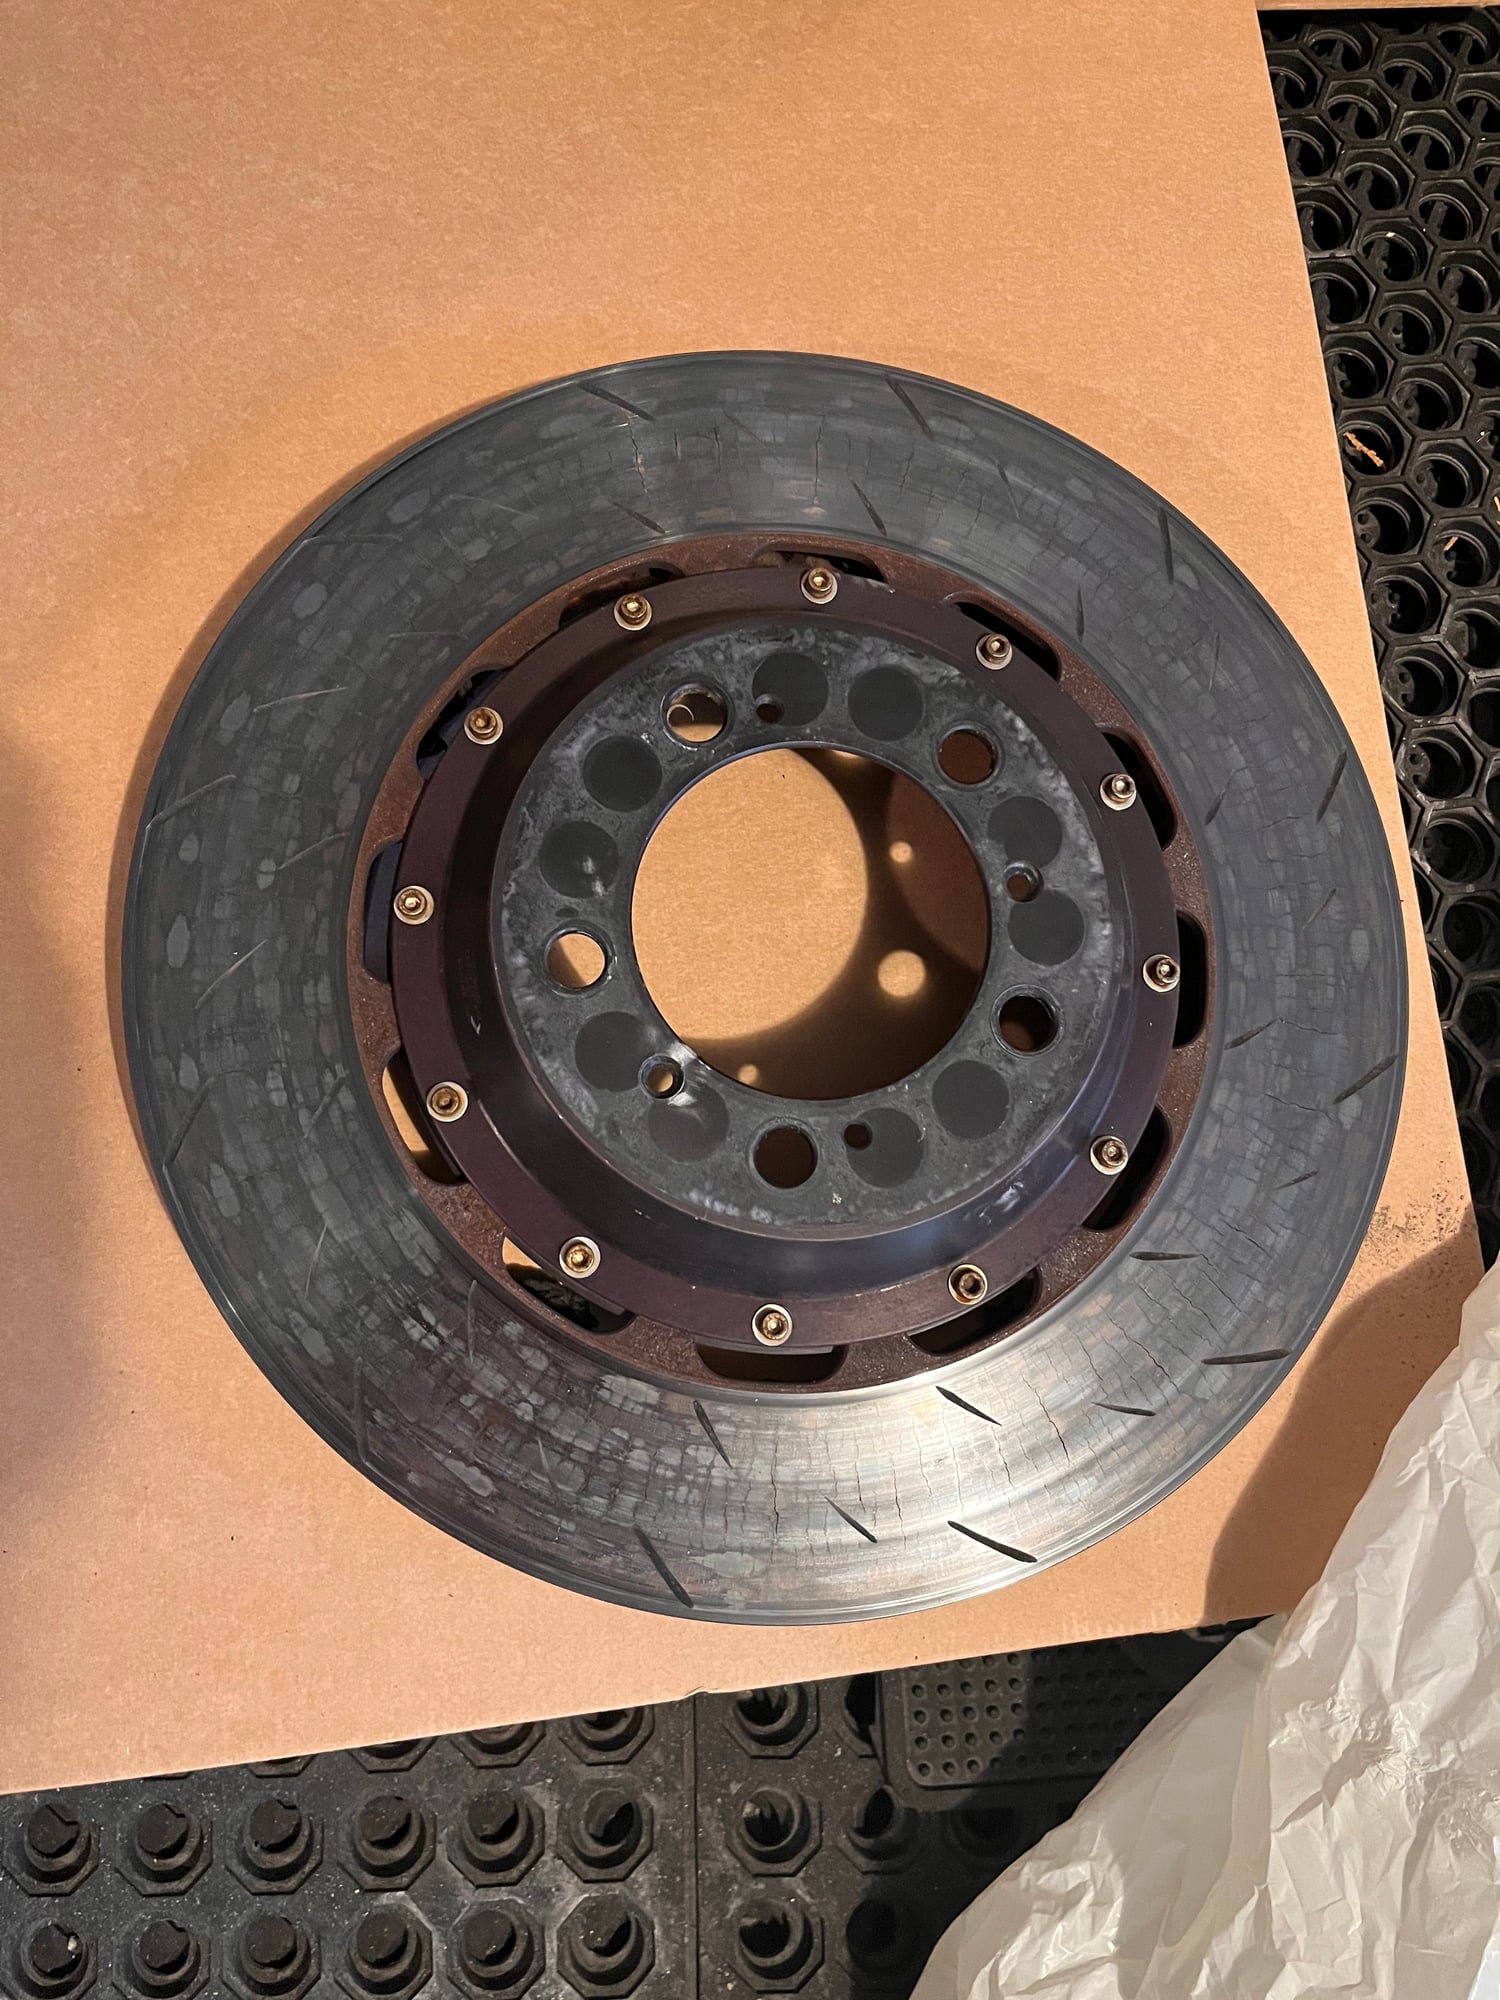 Accessories - GT3 997.2 parts and wheels for sale - Used - 2010 to 2011 Porsche GT3 - Champlain, NY 12919, United States